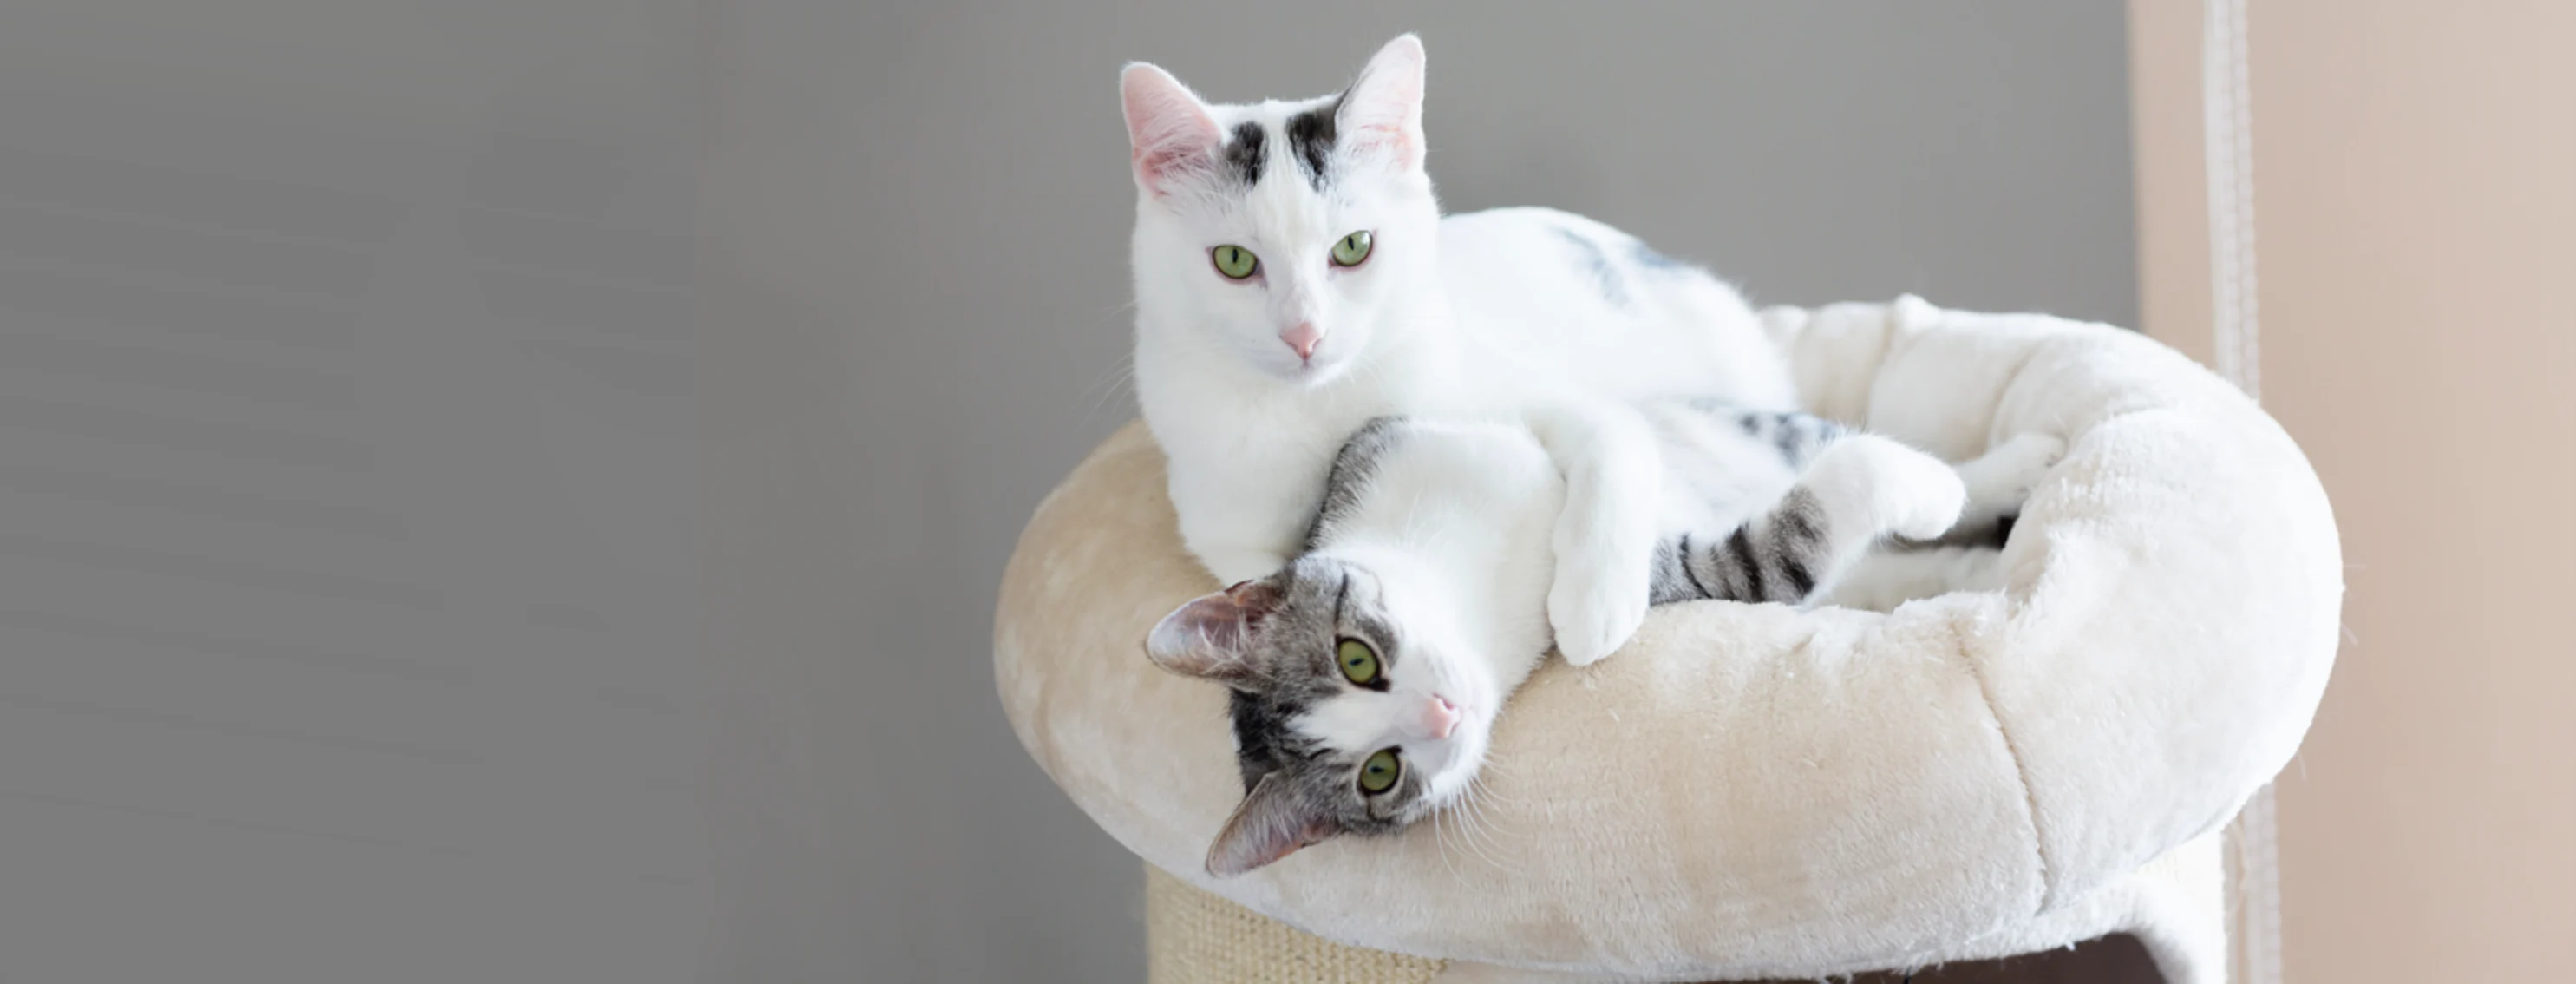 Two cats playing on a cat tree